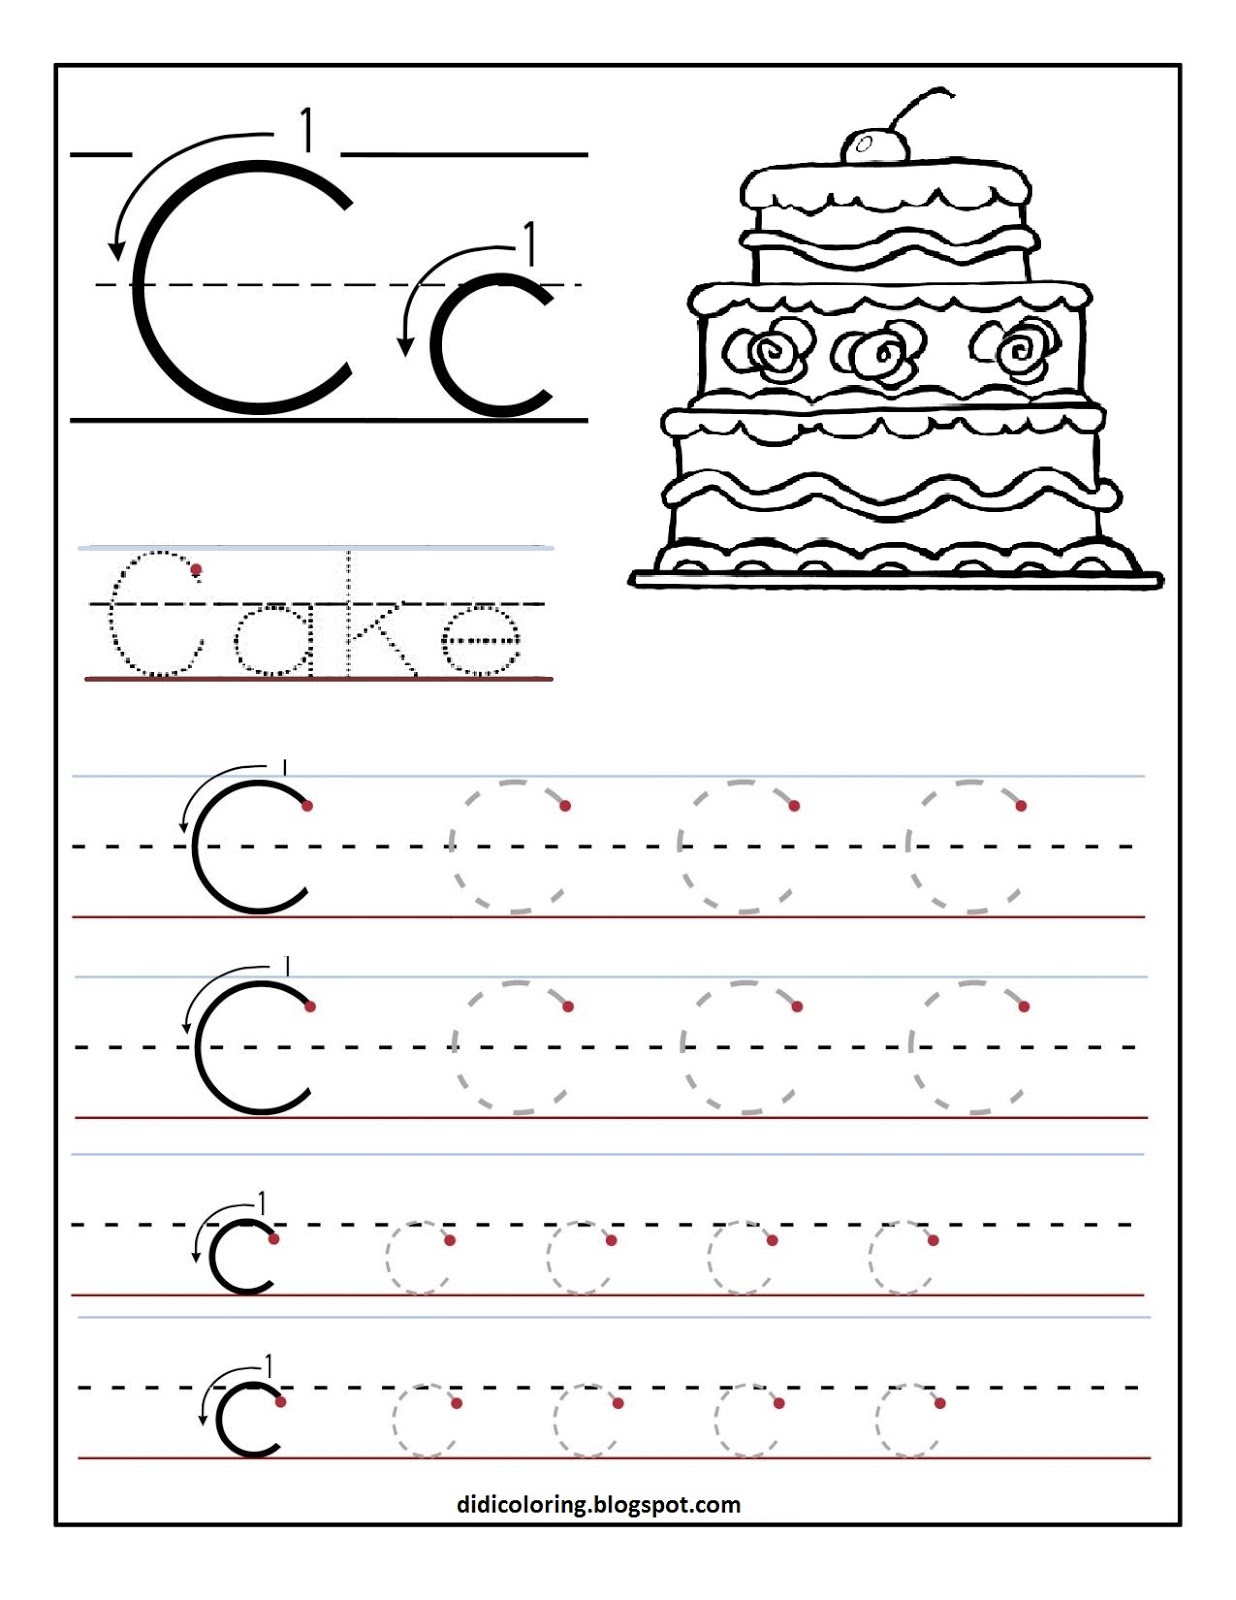 Didi coloring Page: Free printable worksheet letter C for your